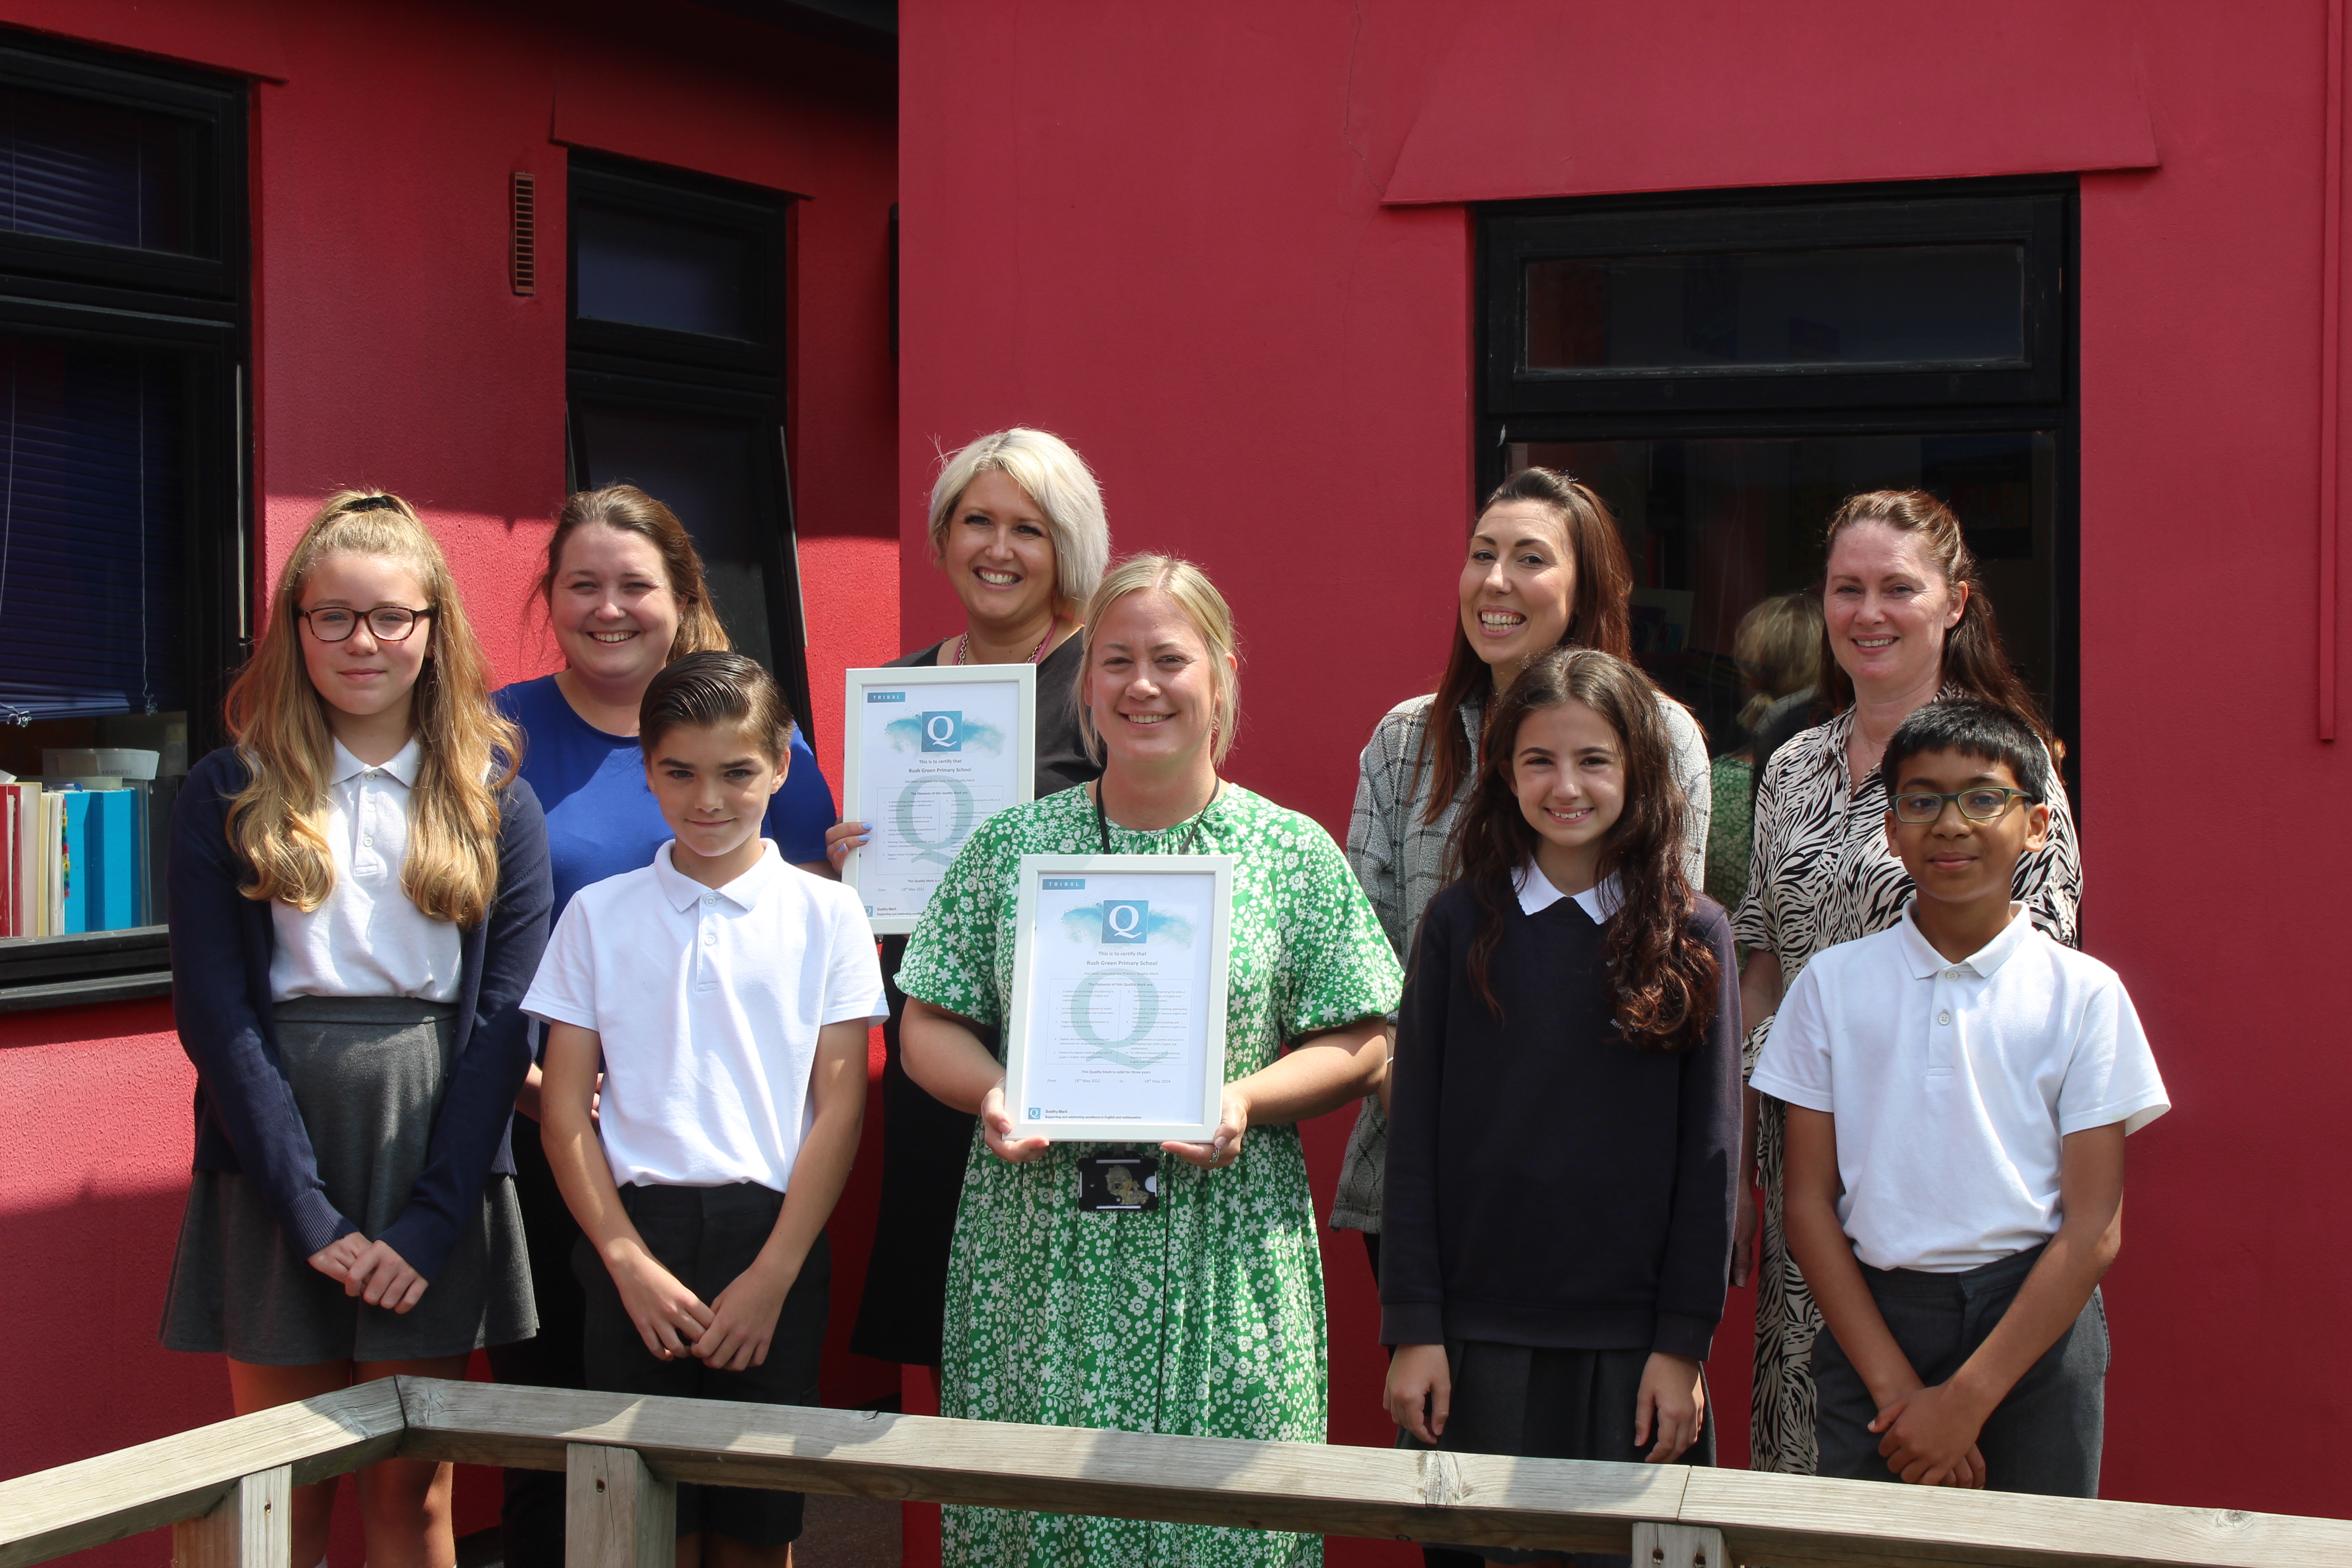 Staff and pupils from Rush Green Primary School with awards